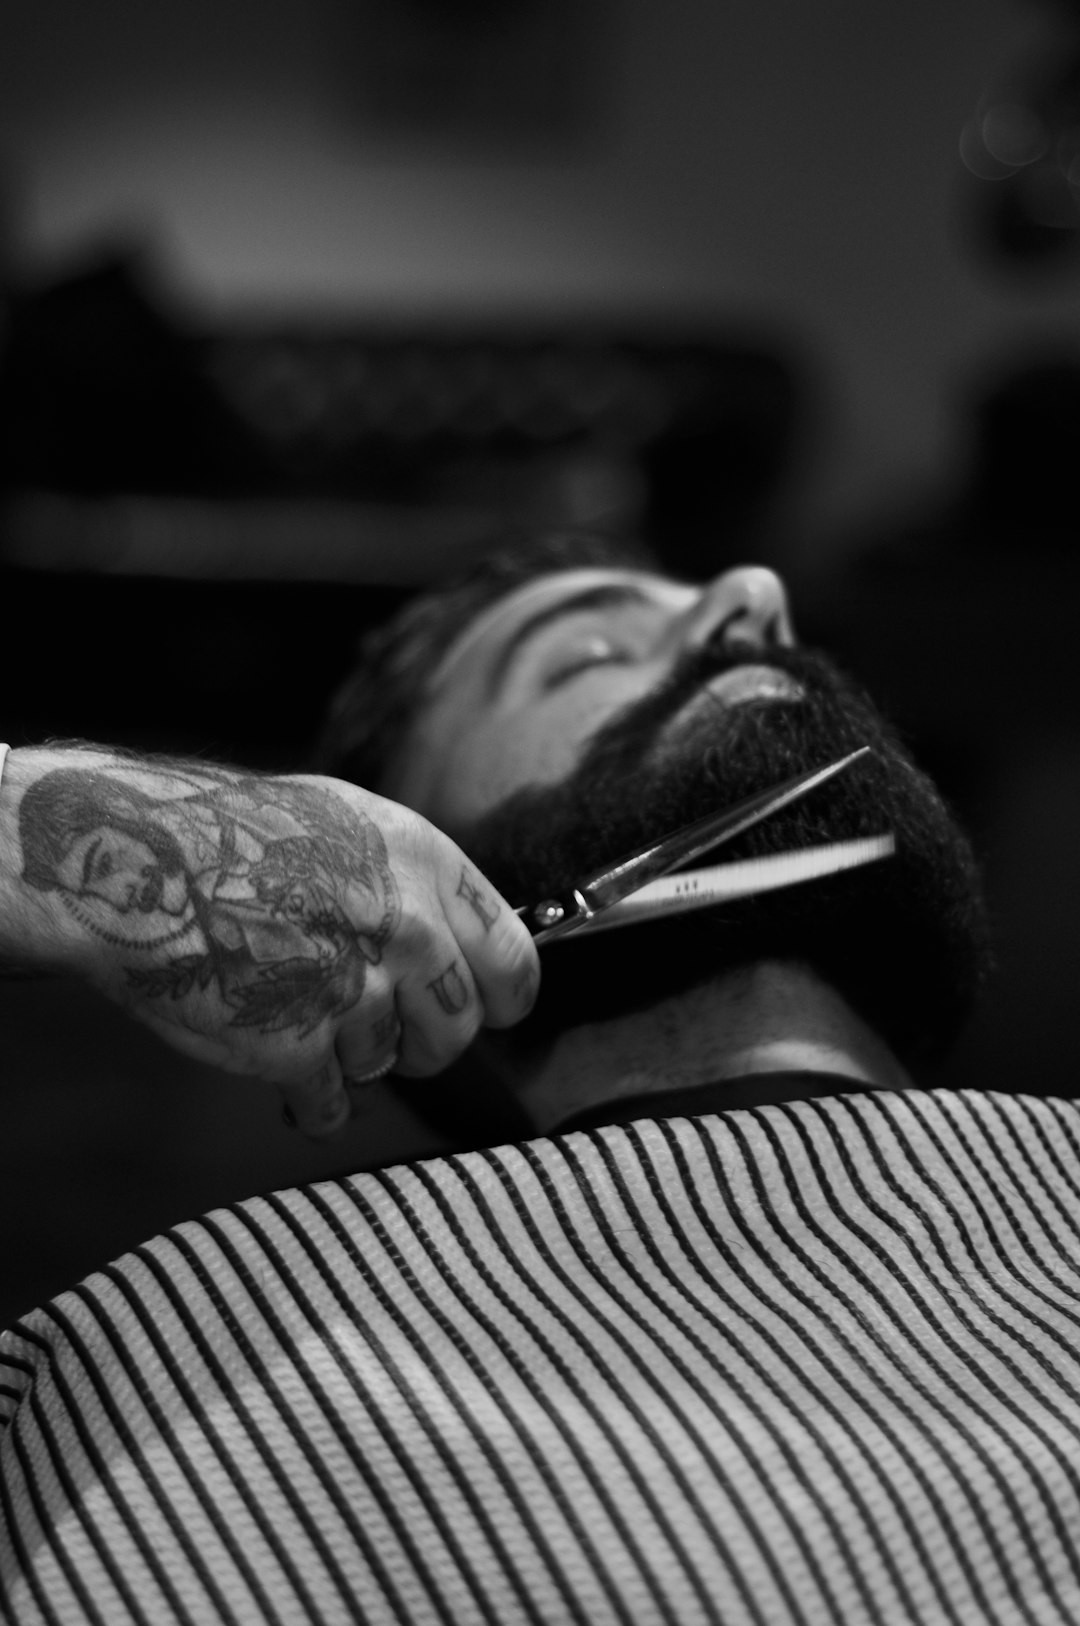 In Cork, there is a new barber in town specializing in classic cuts. Here we can see “the man in the chair,” relaxing and enjoying some peace and quite, while the barber cleans him up a bit.